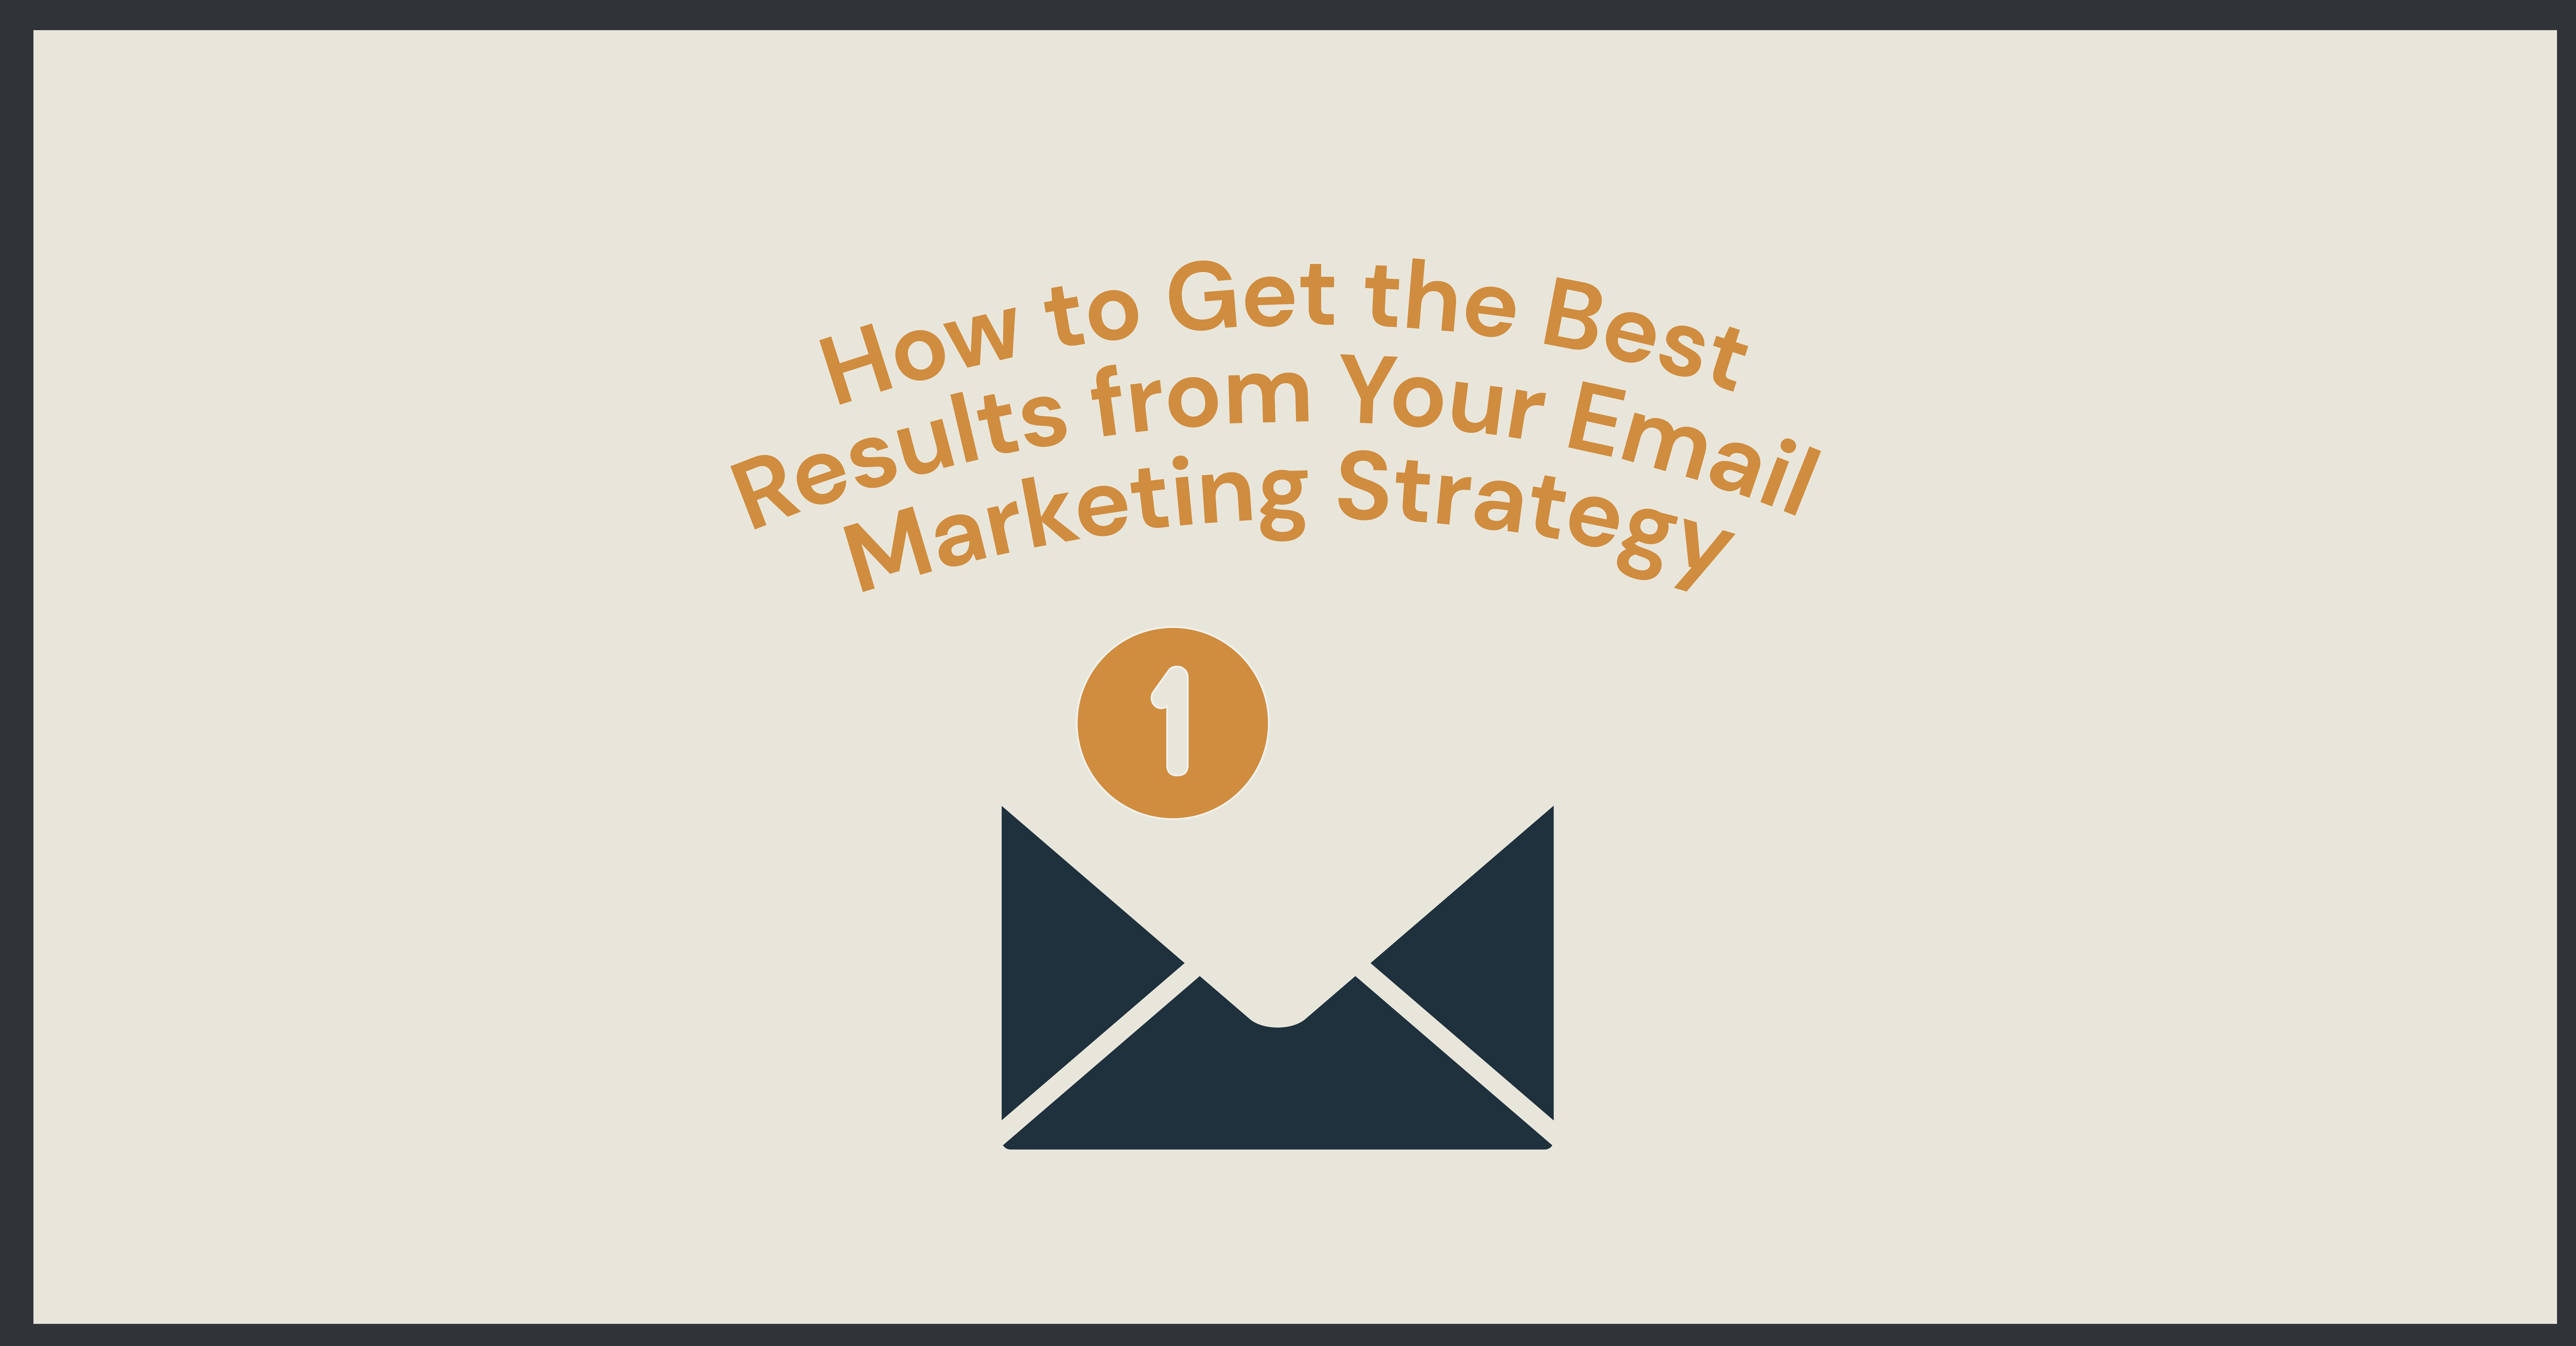 get the best results from email marketing